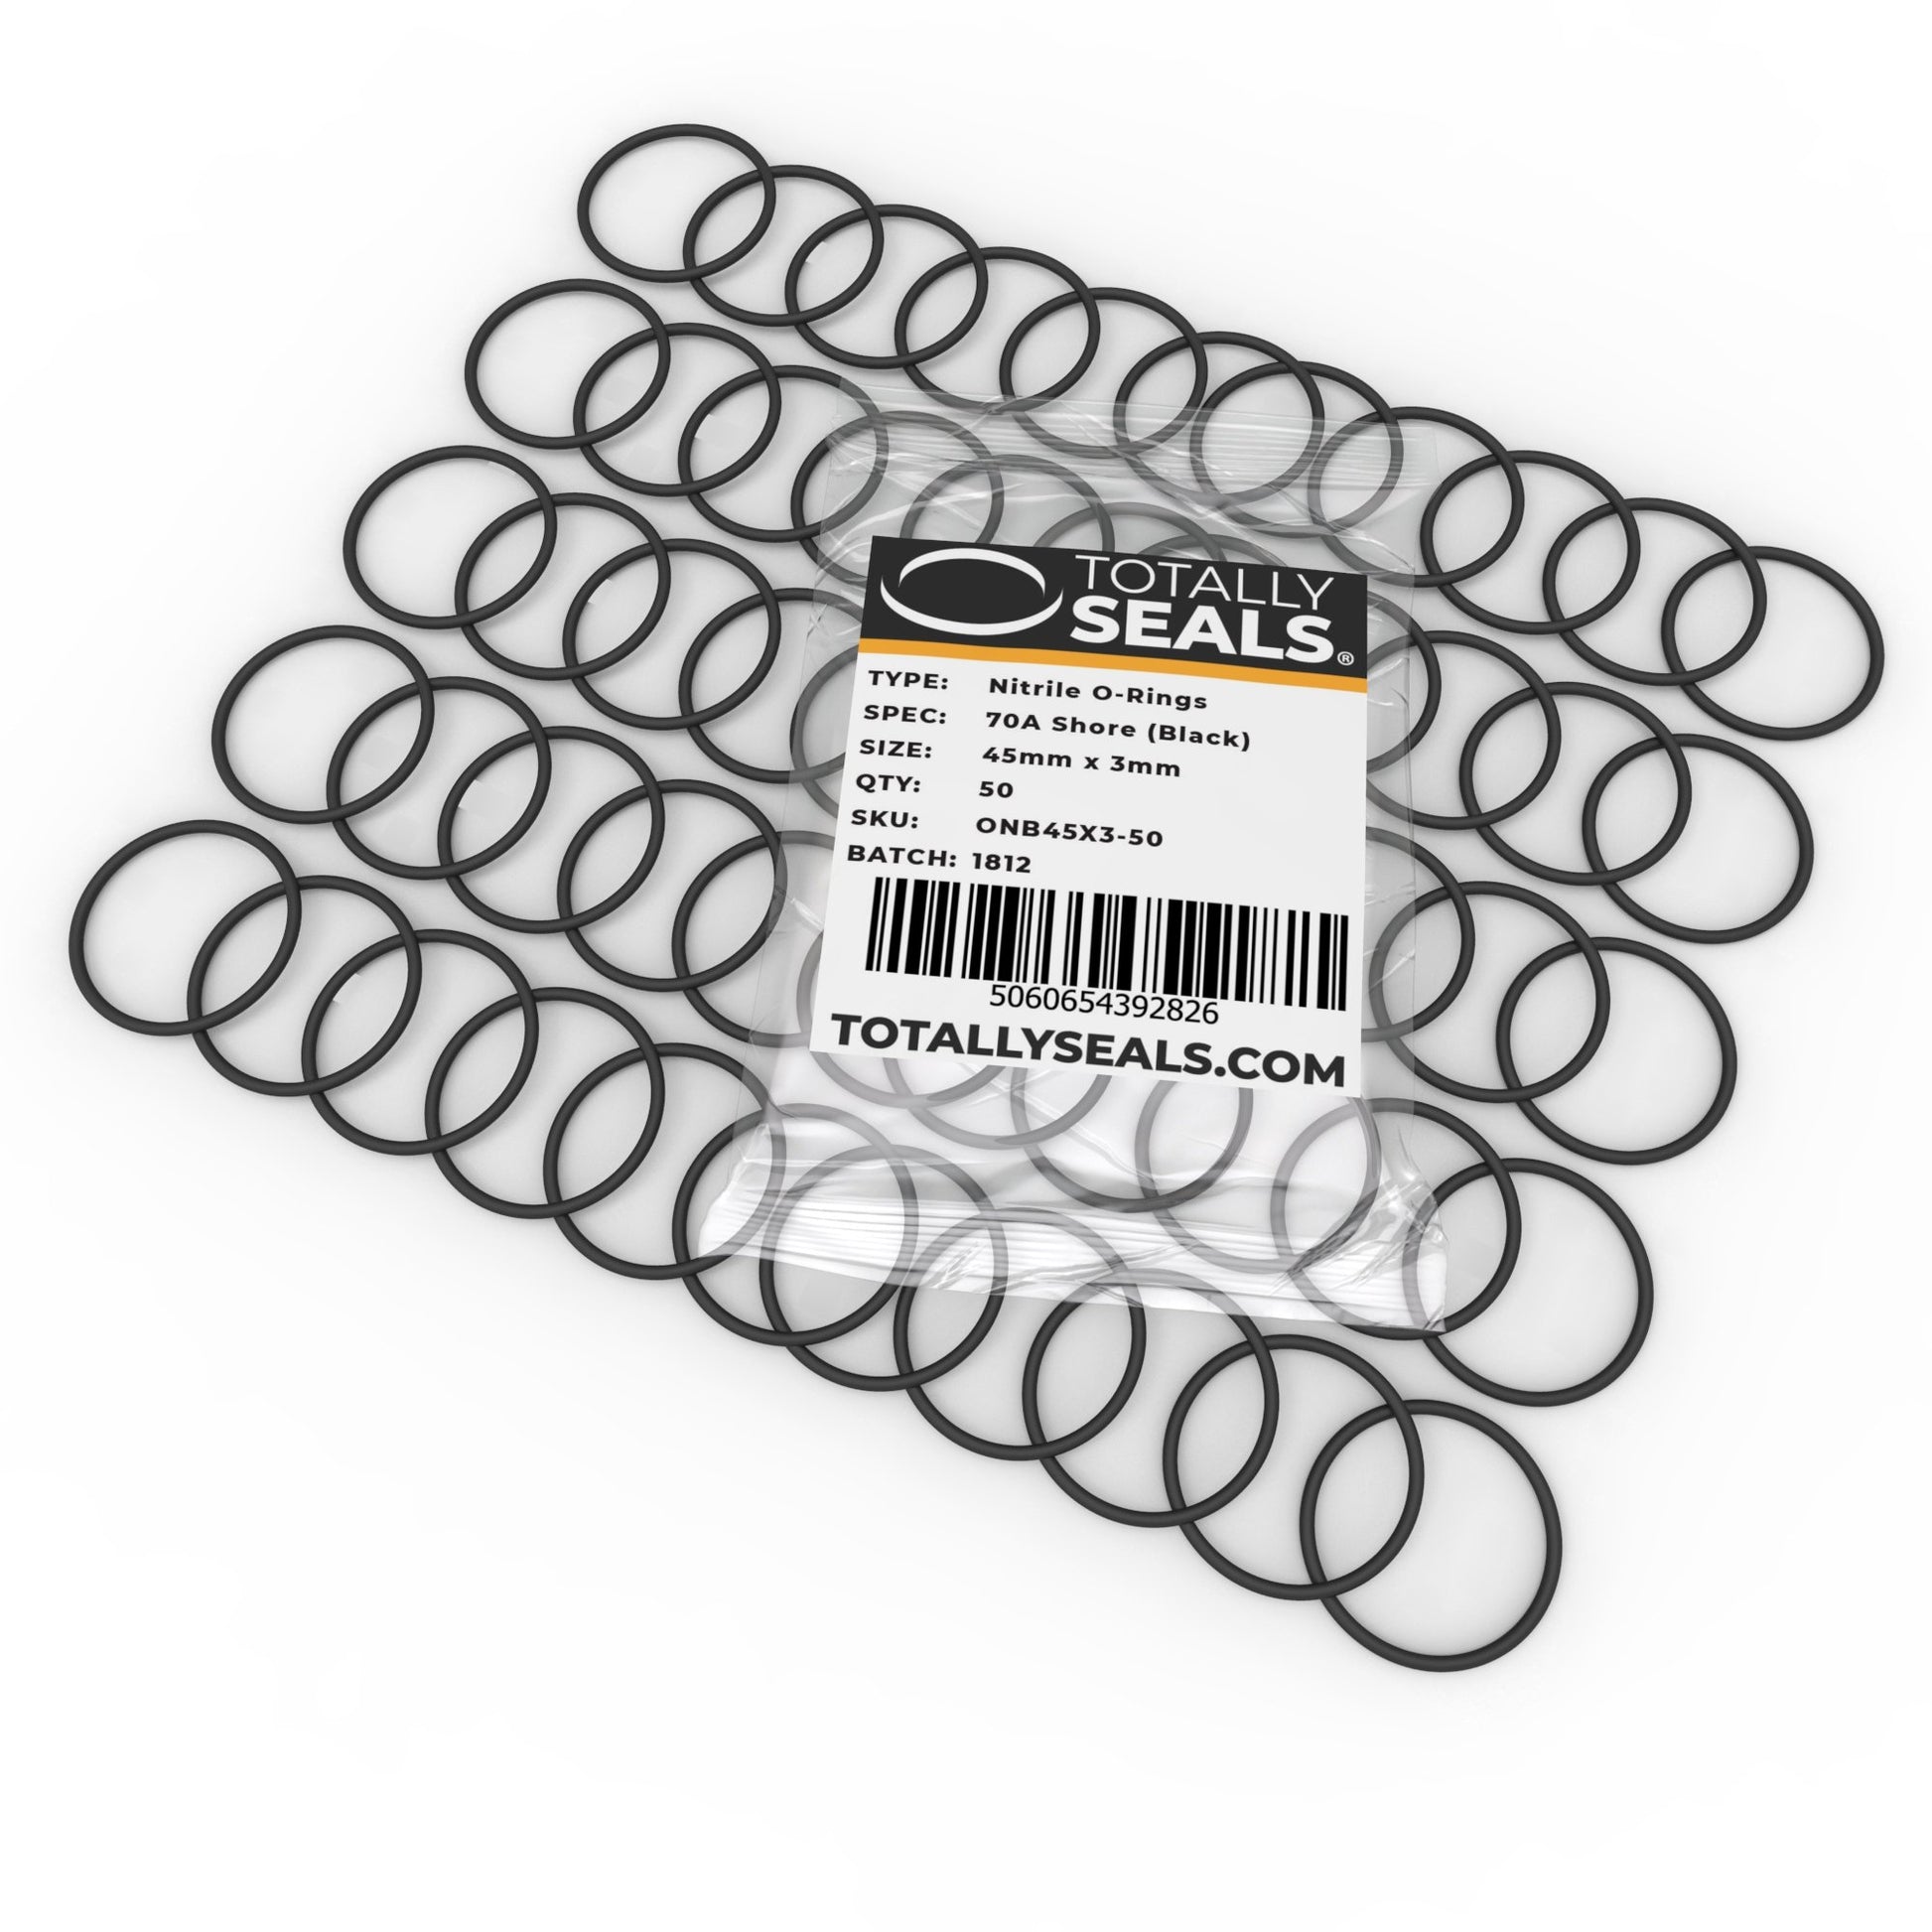 45mm x 3mm (51mm OD) Nitrile O-Rings - Totally Seals®